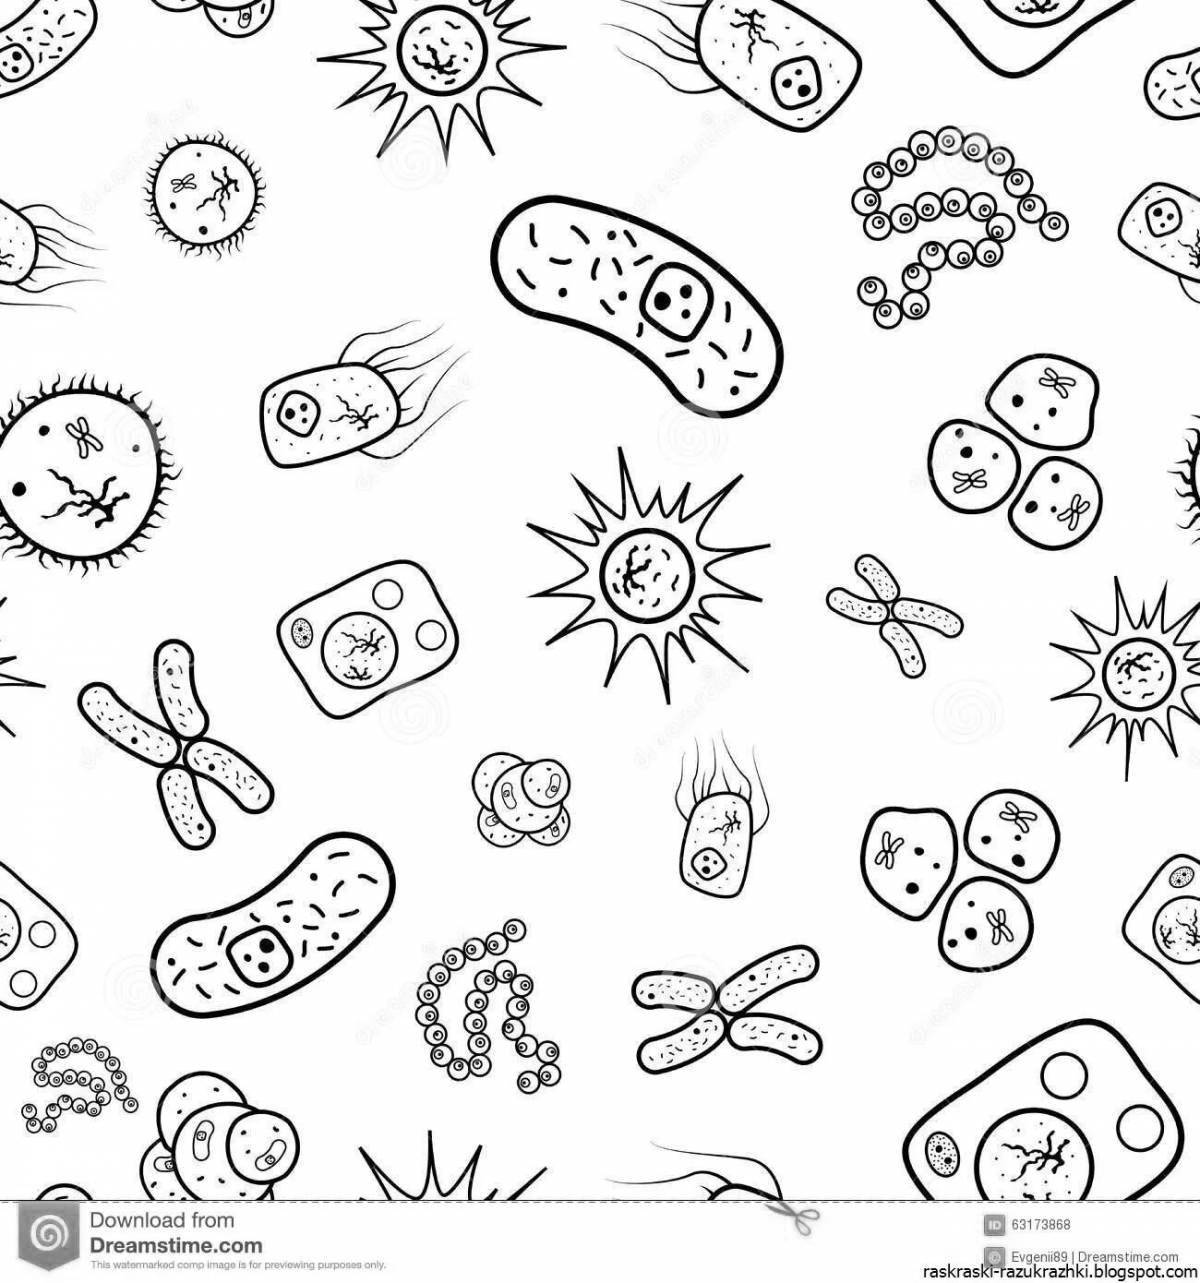 Coloring book alluring microbes and bacteria